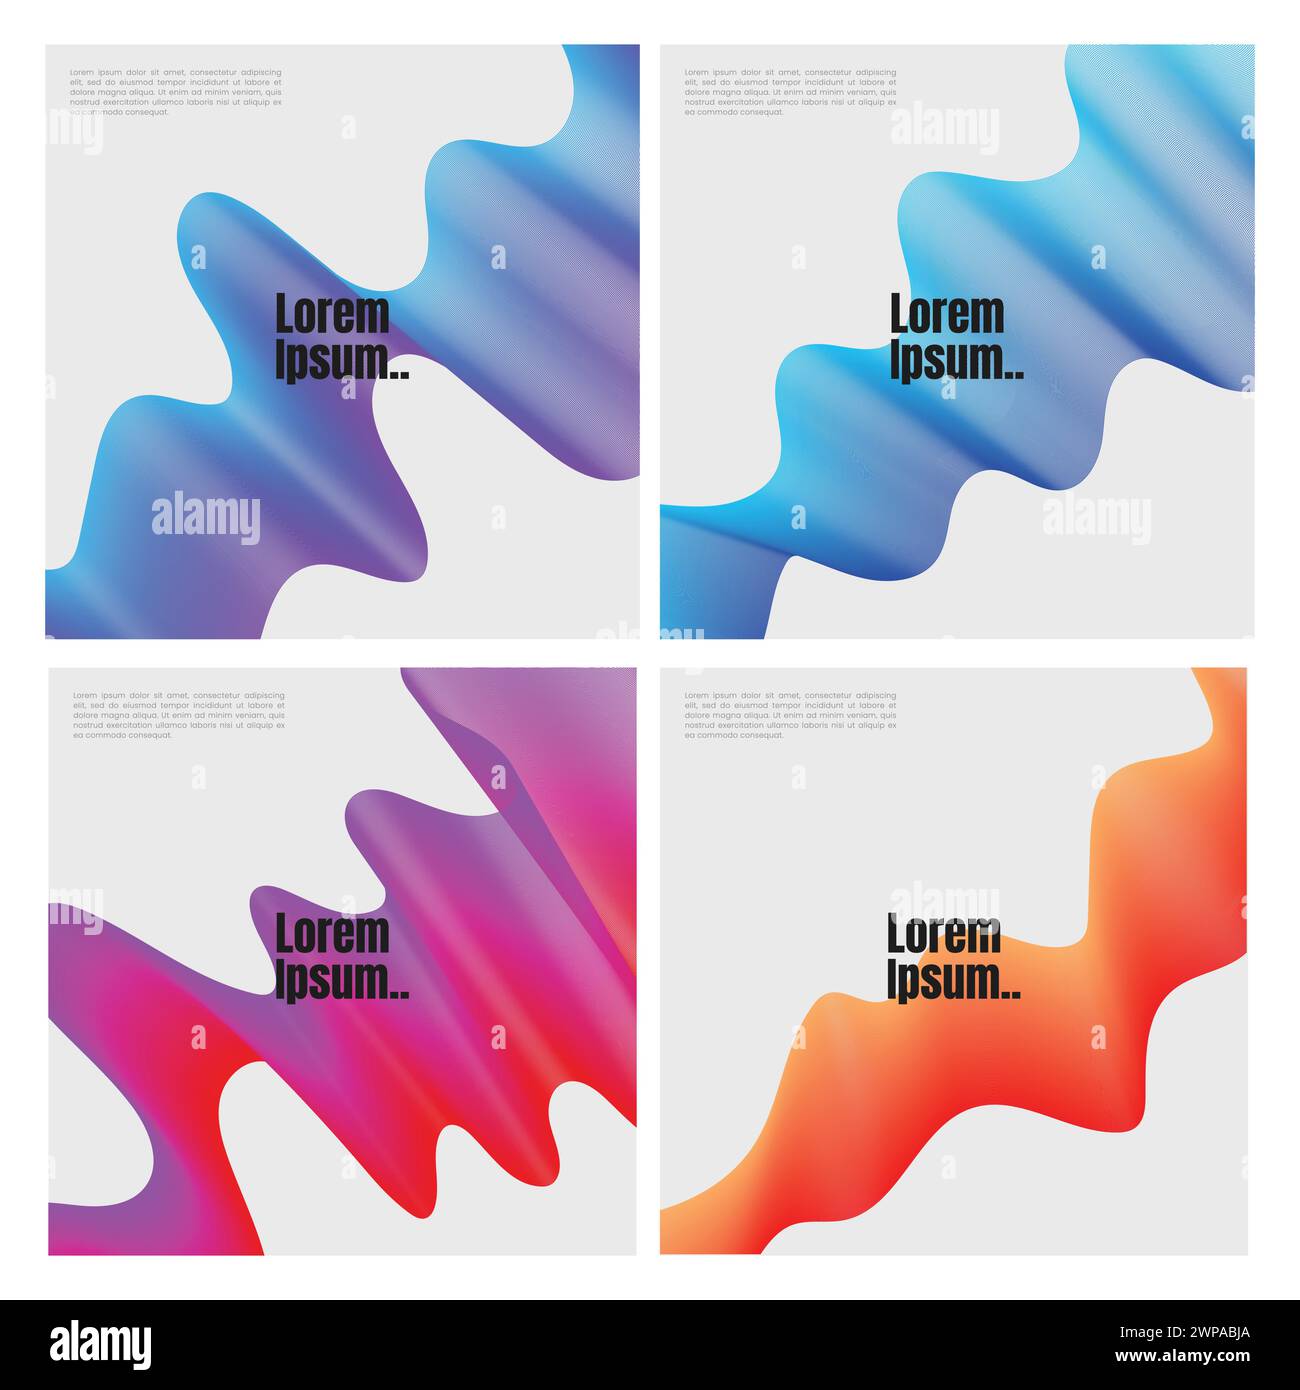 Modern abstract covers set. Cool gradient shapes composition. Eps10 vector. Modern covers with colorful twisting shapes. Trendy minimal design. Abstra Stock Vector